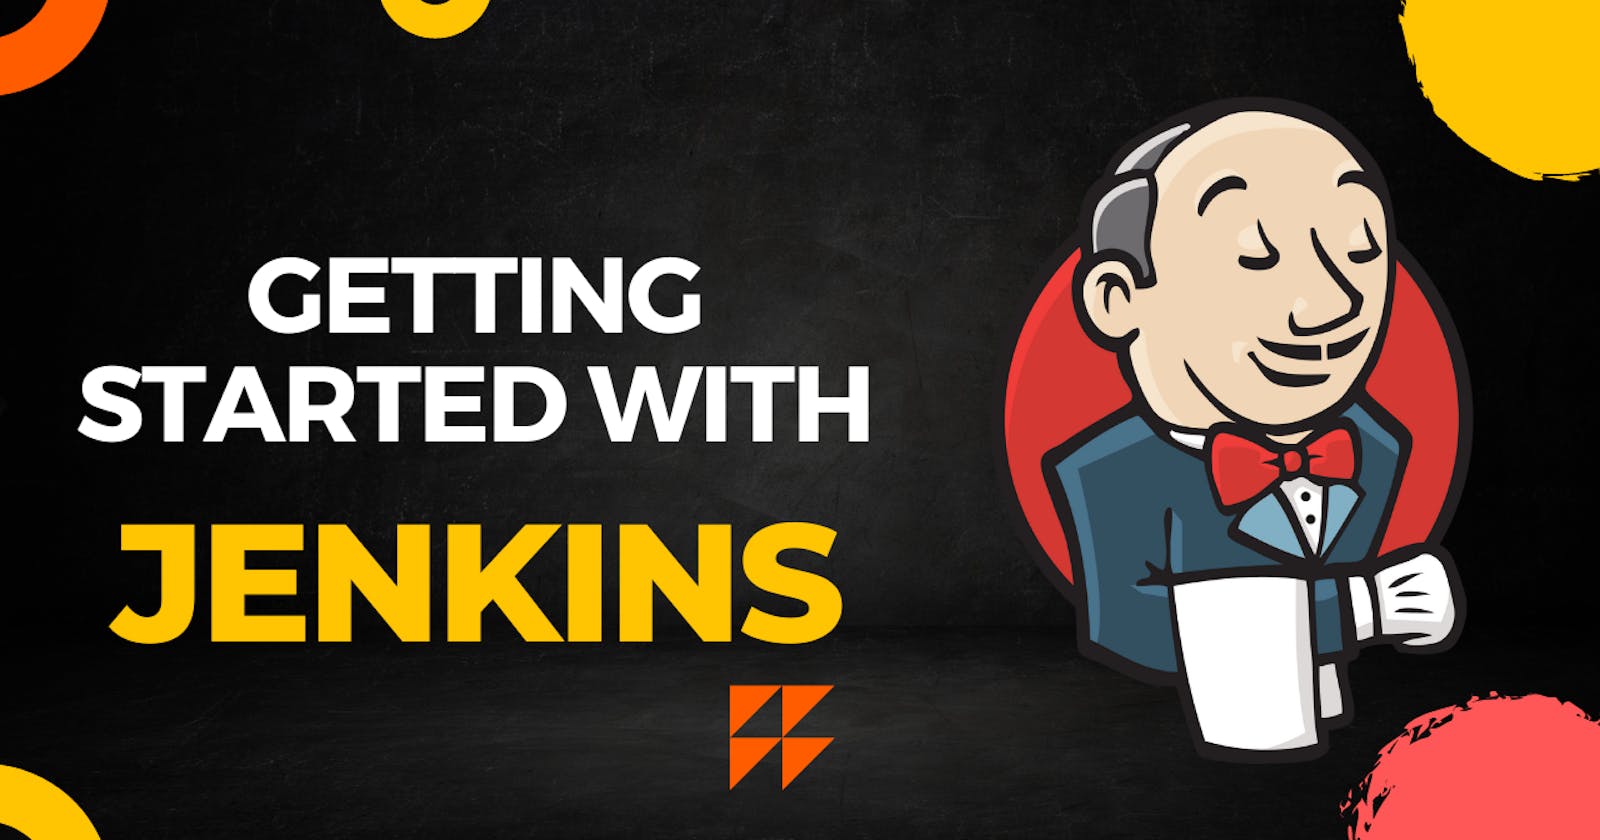 Getting Started with Jenkins